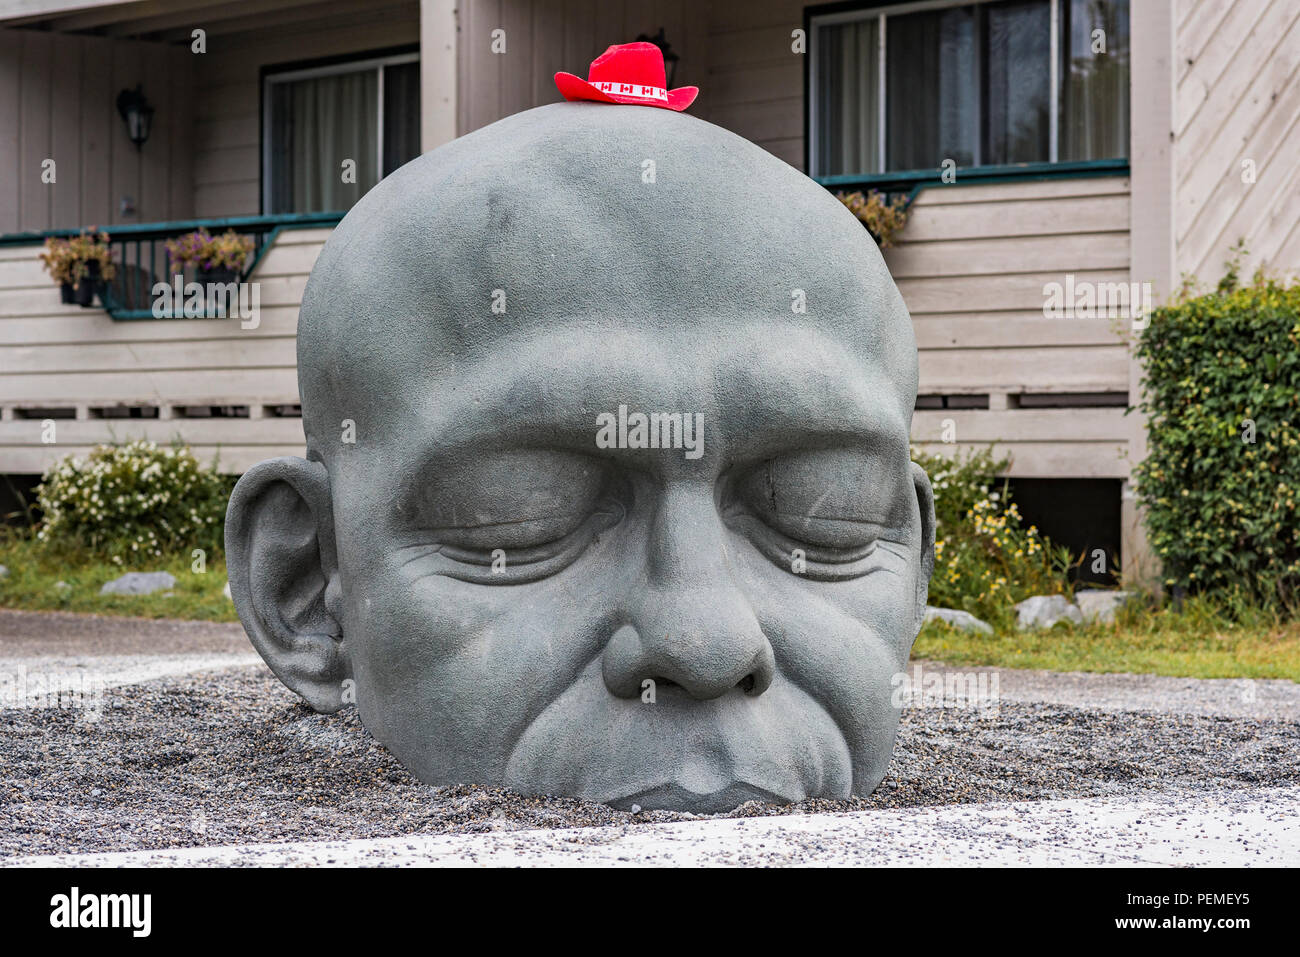 Sculpture named Big Head, a translation of the Gaelic Ceann Mór, a variation of the town's name., Canmore, Alberta, Canada. Stock Photo